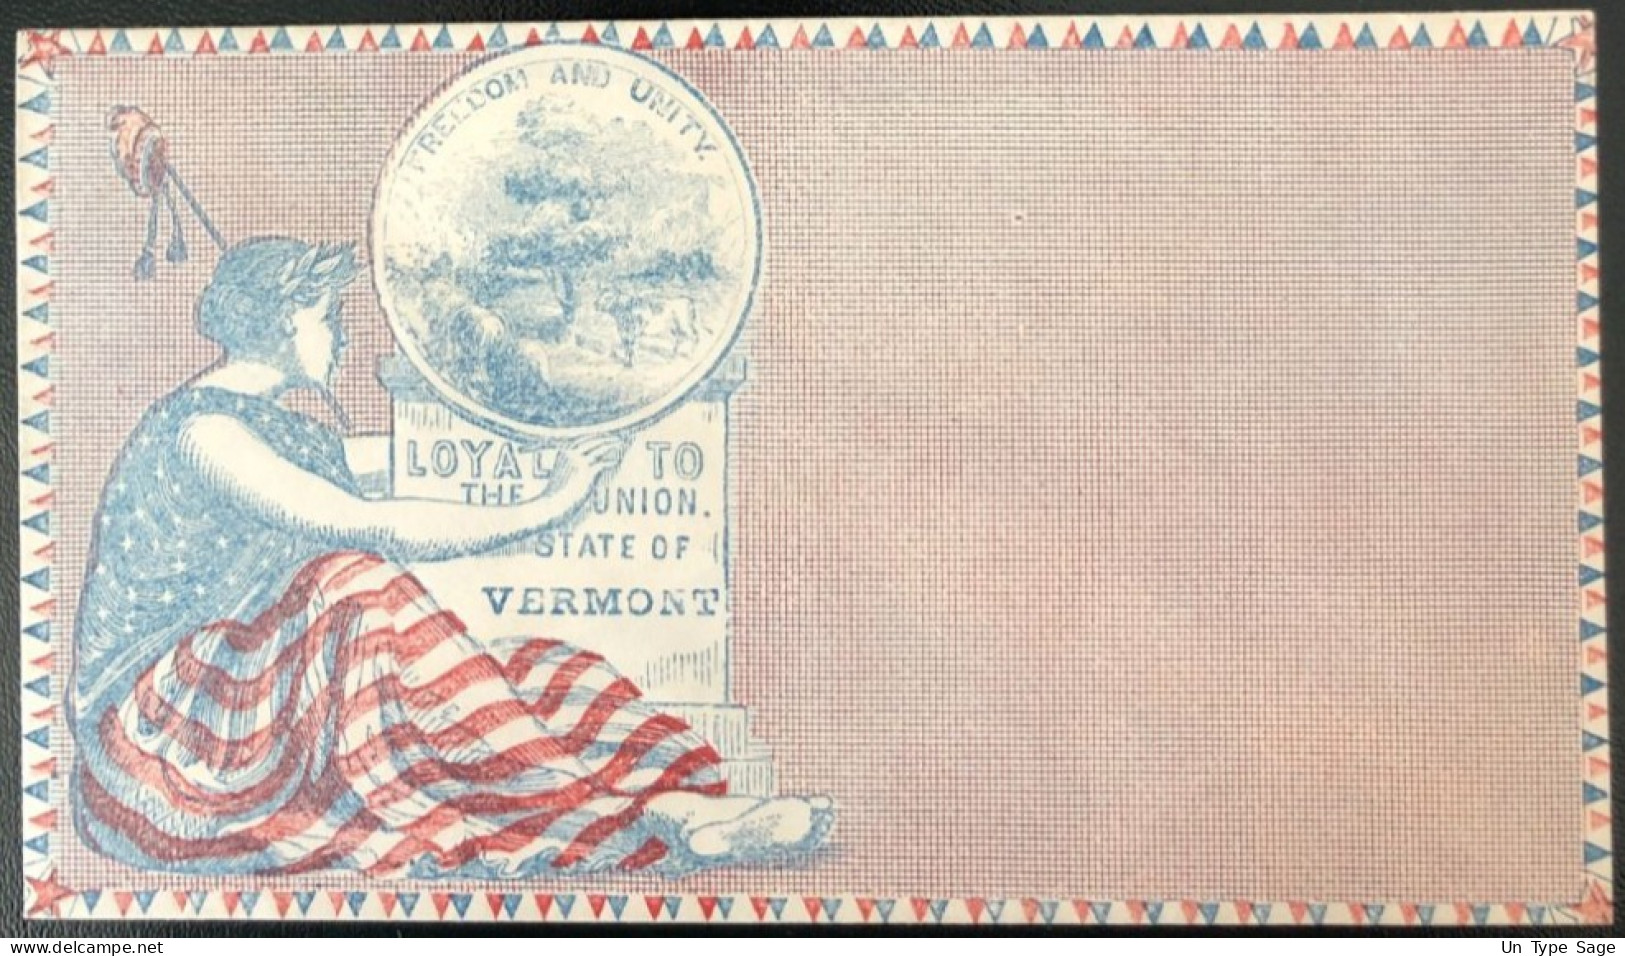 U.S.A, Civil War, Patriotic Cover - "Loyal To The Union. State Of VERMONT" - Unused - (C456) - Poststempel